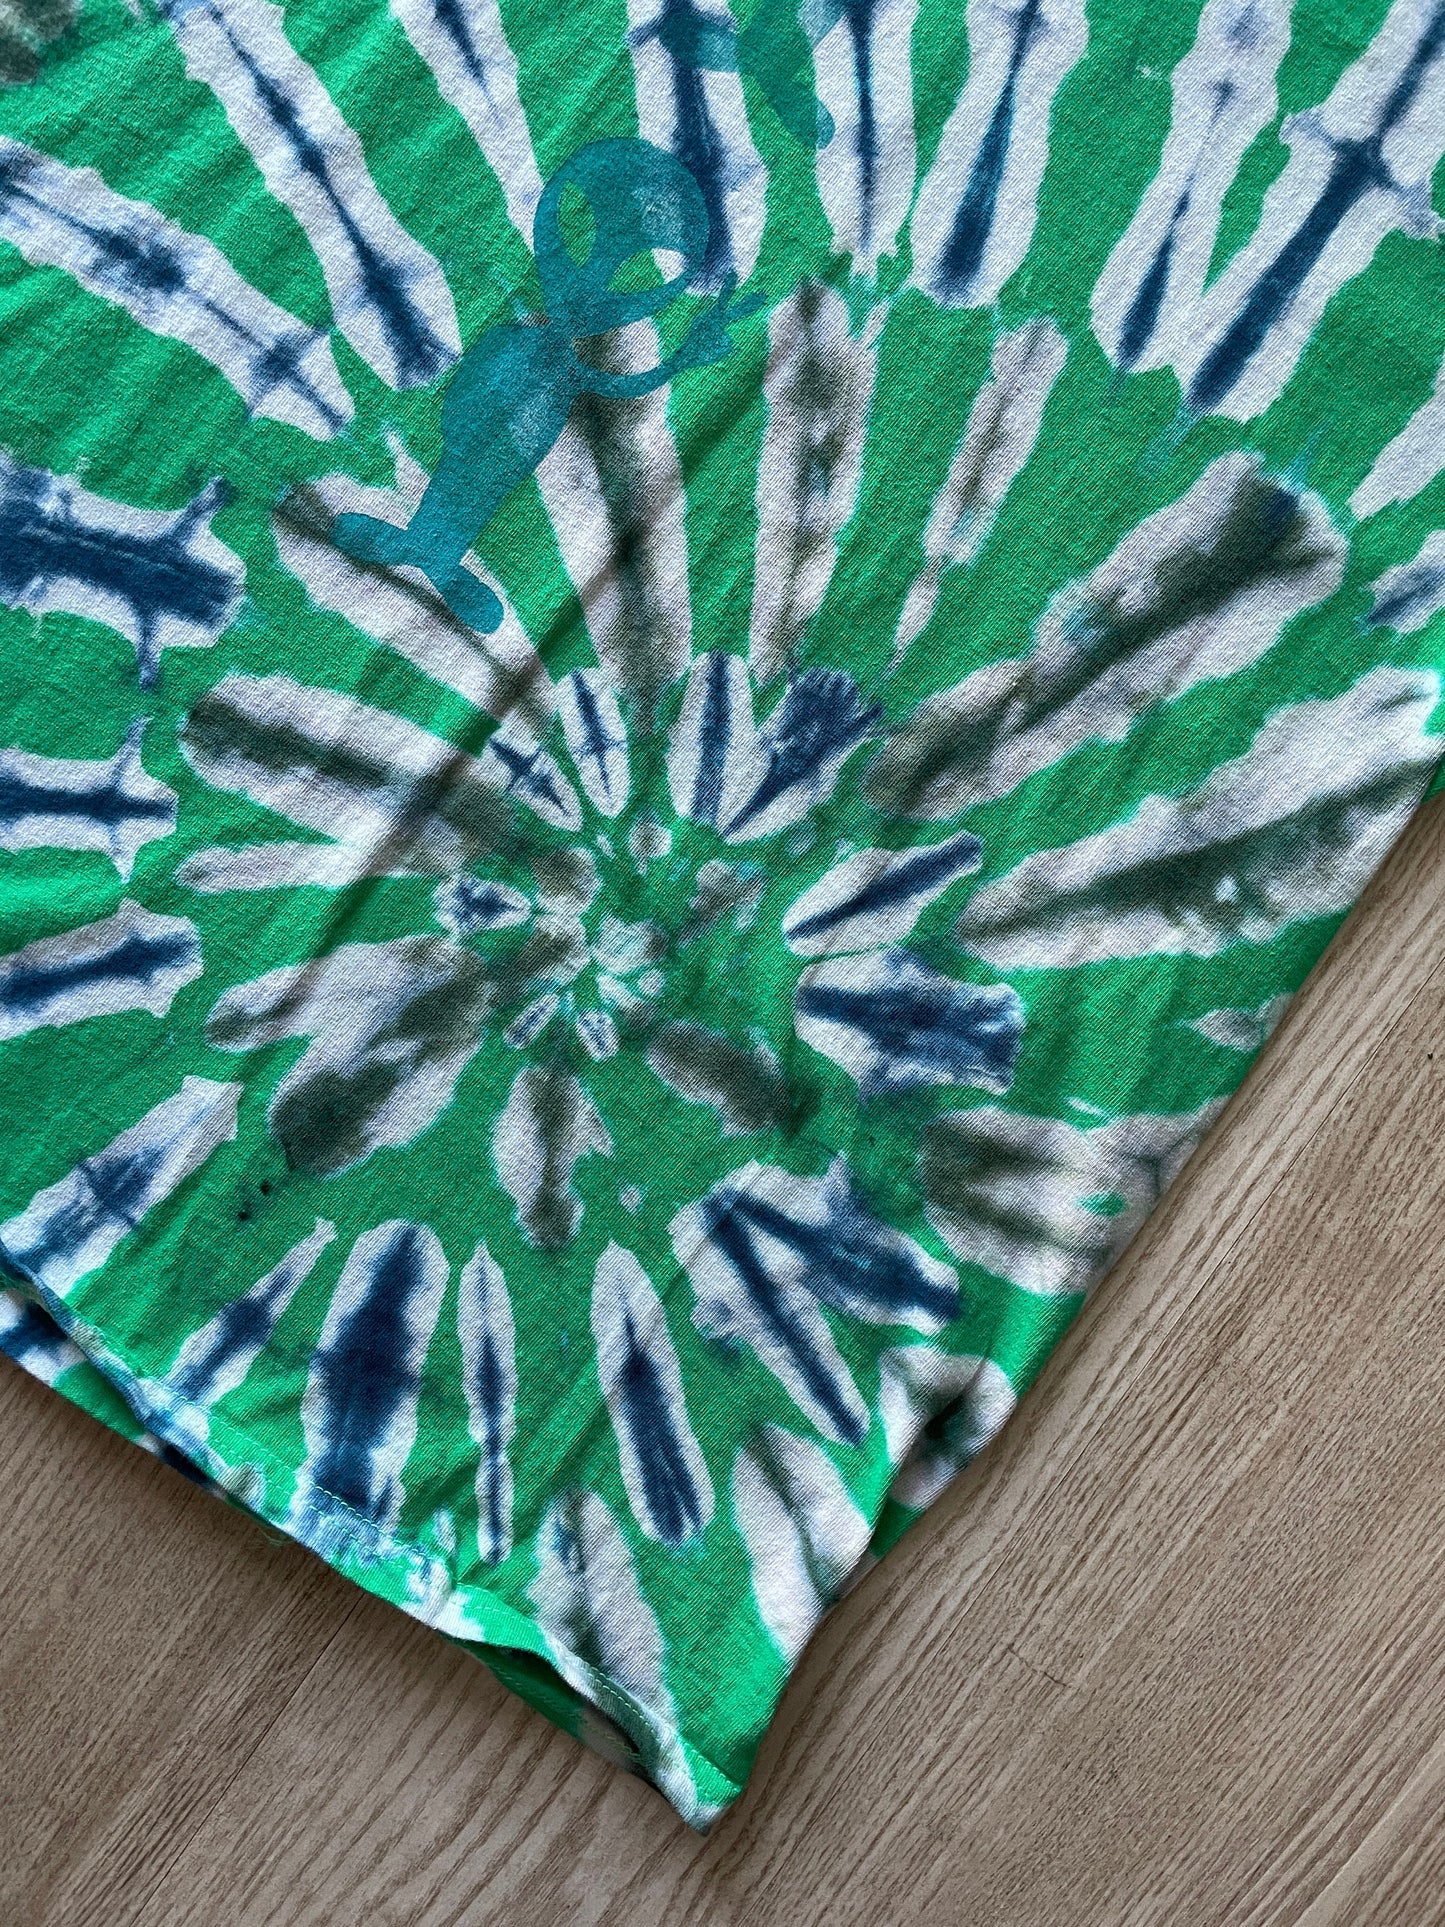 XL Men's Hand-Printed Alien Reverse Tie Dye Short Sleeve T-Shirt | Handmade One-Of-a-Kind Upcycled Green, Blue, and White Spiral Top